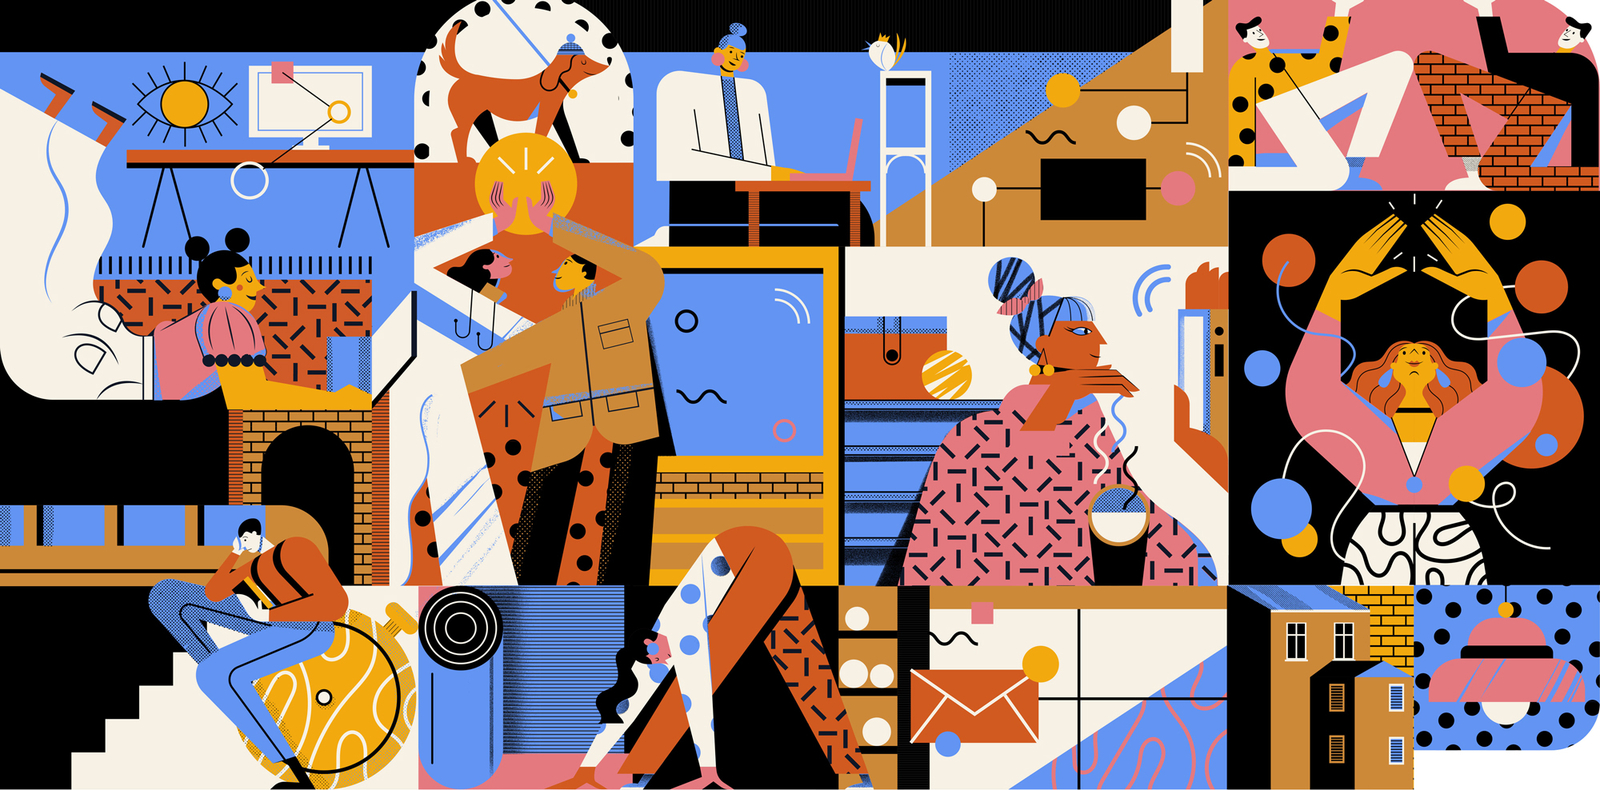 Why We Work by Folio Illustration Agency on Dribbble